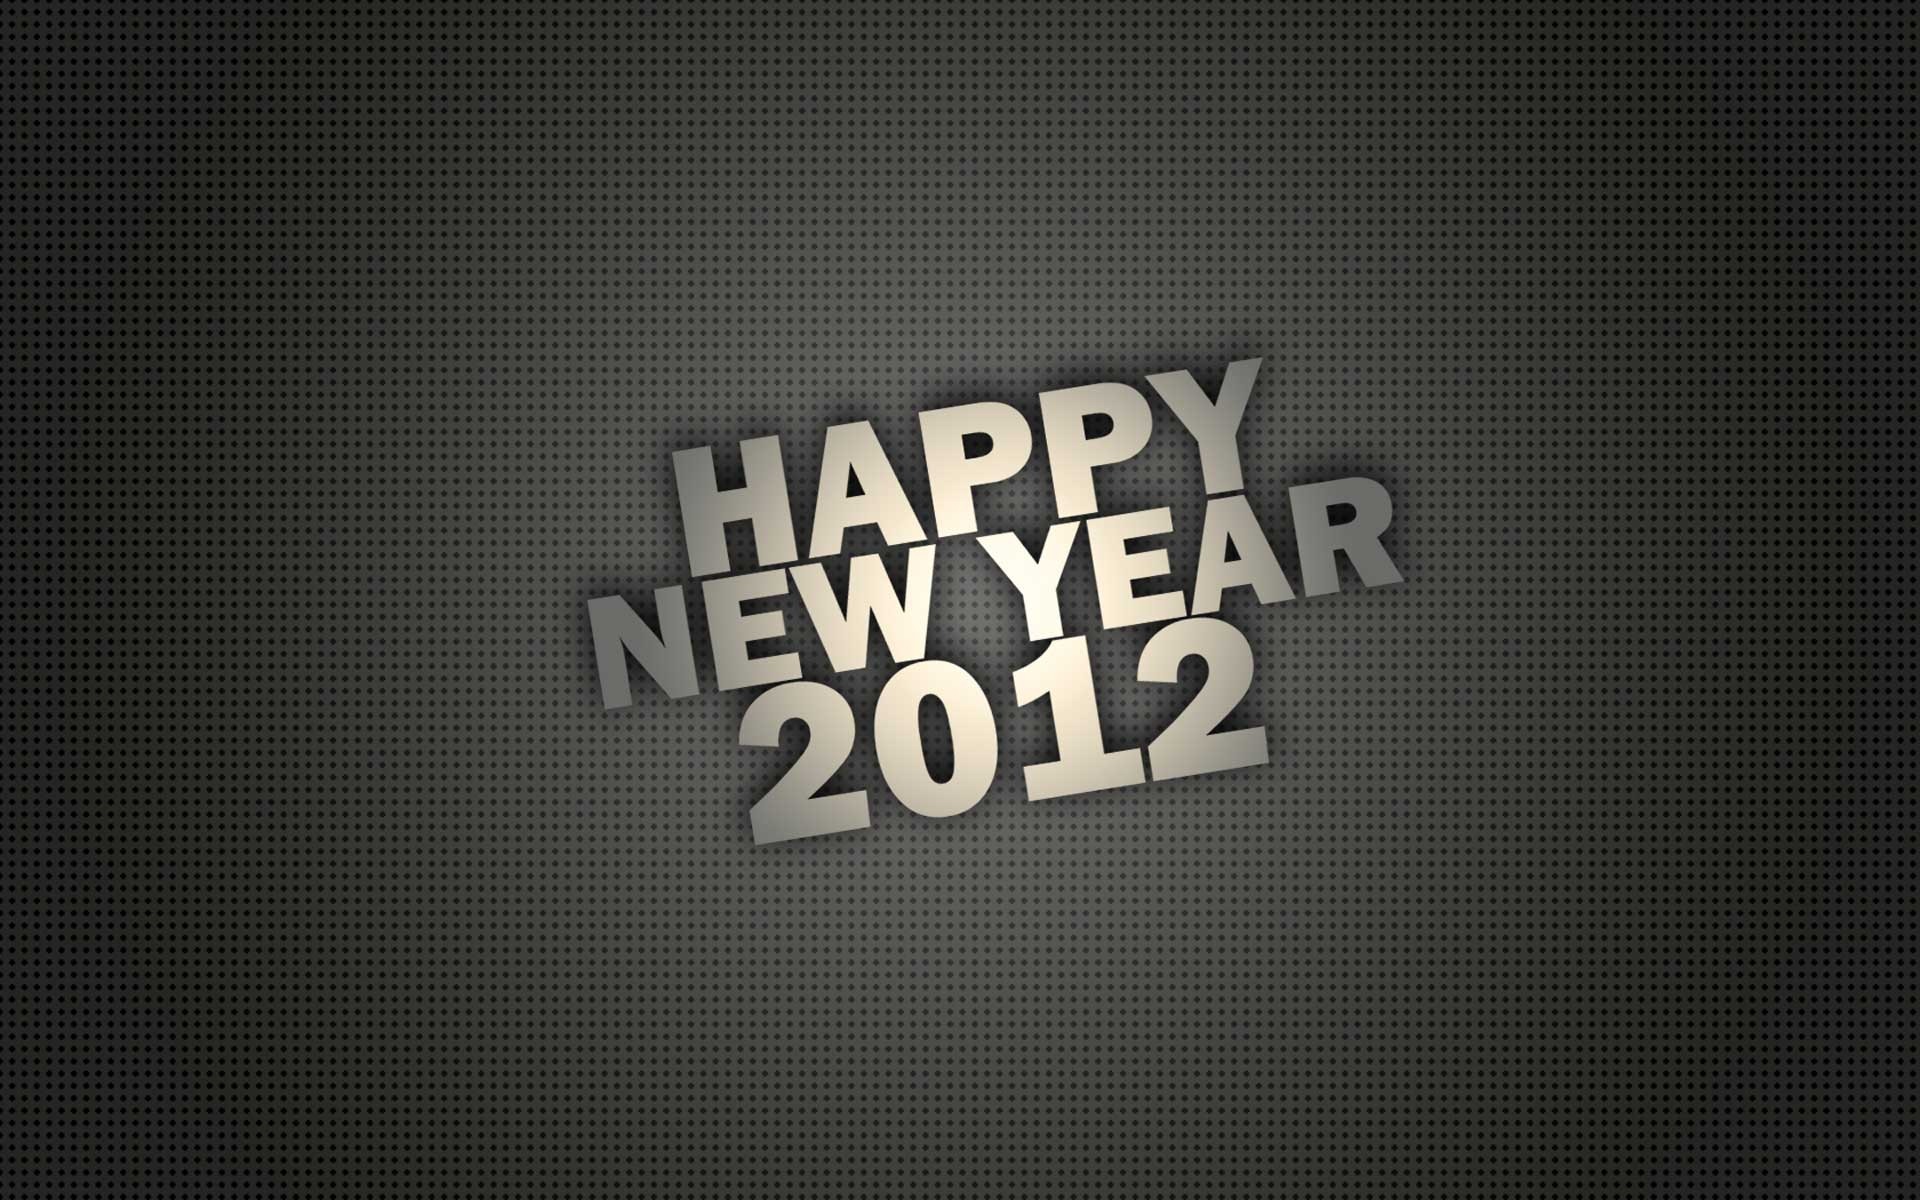 2012 New Year wallpapers (2) #4 - 1920x1200